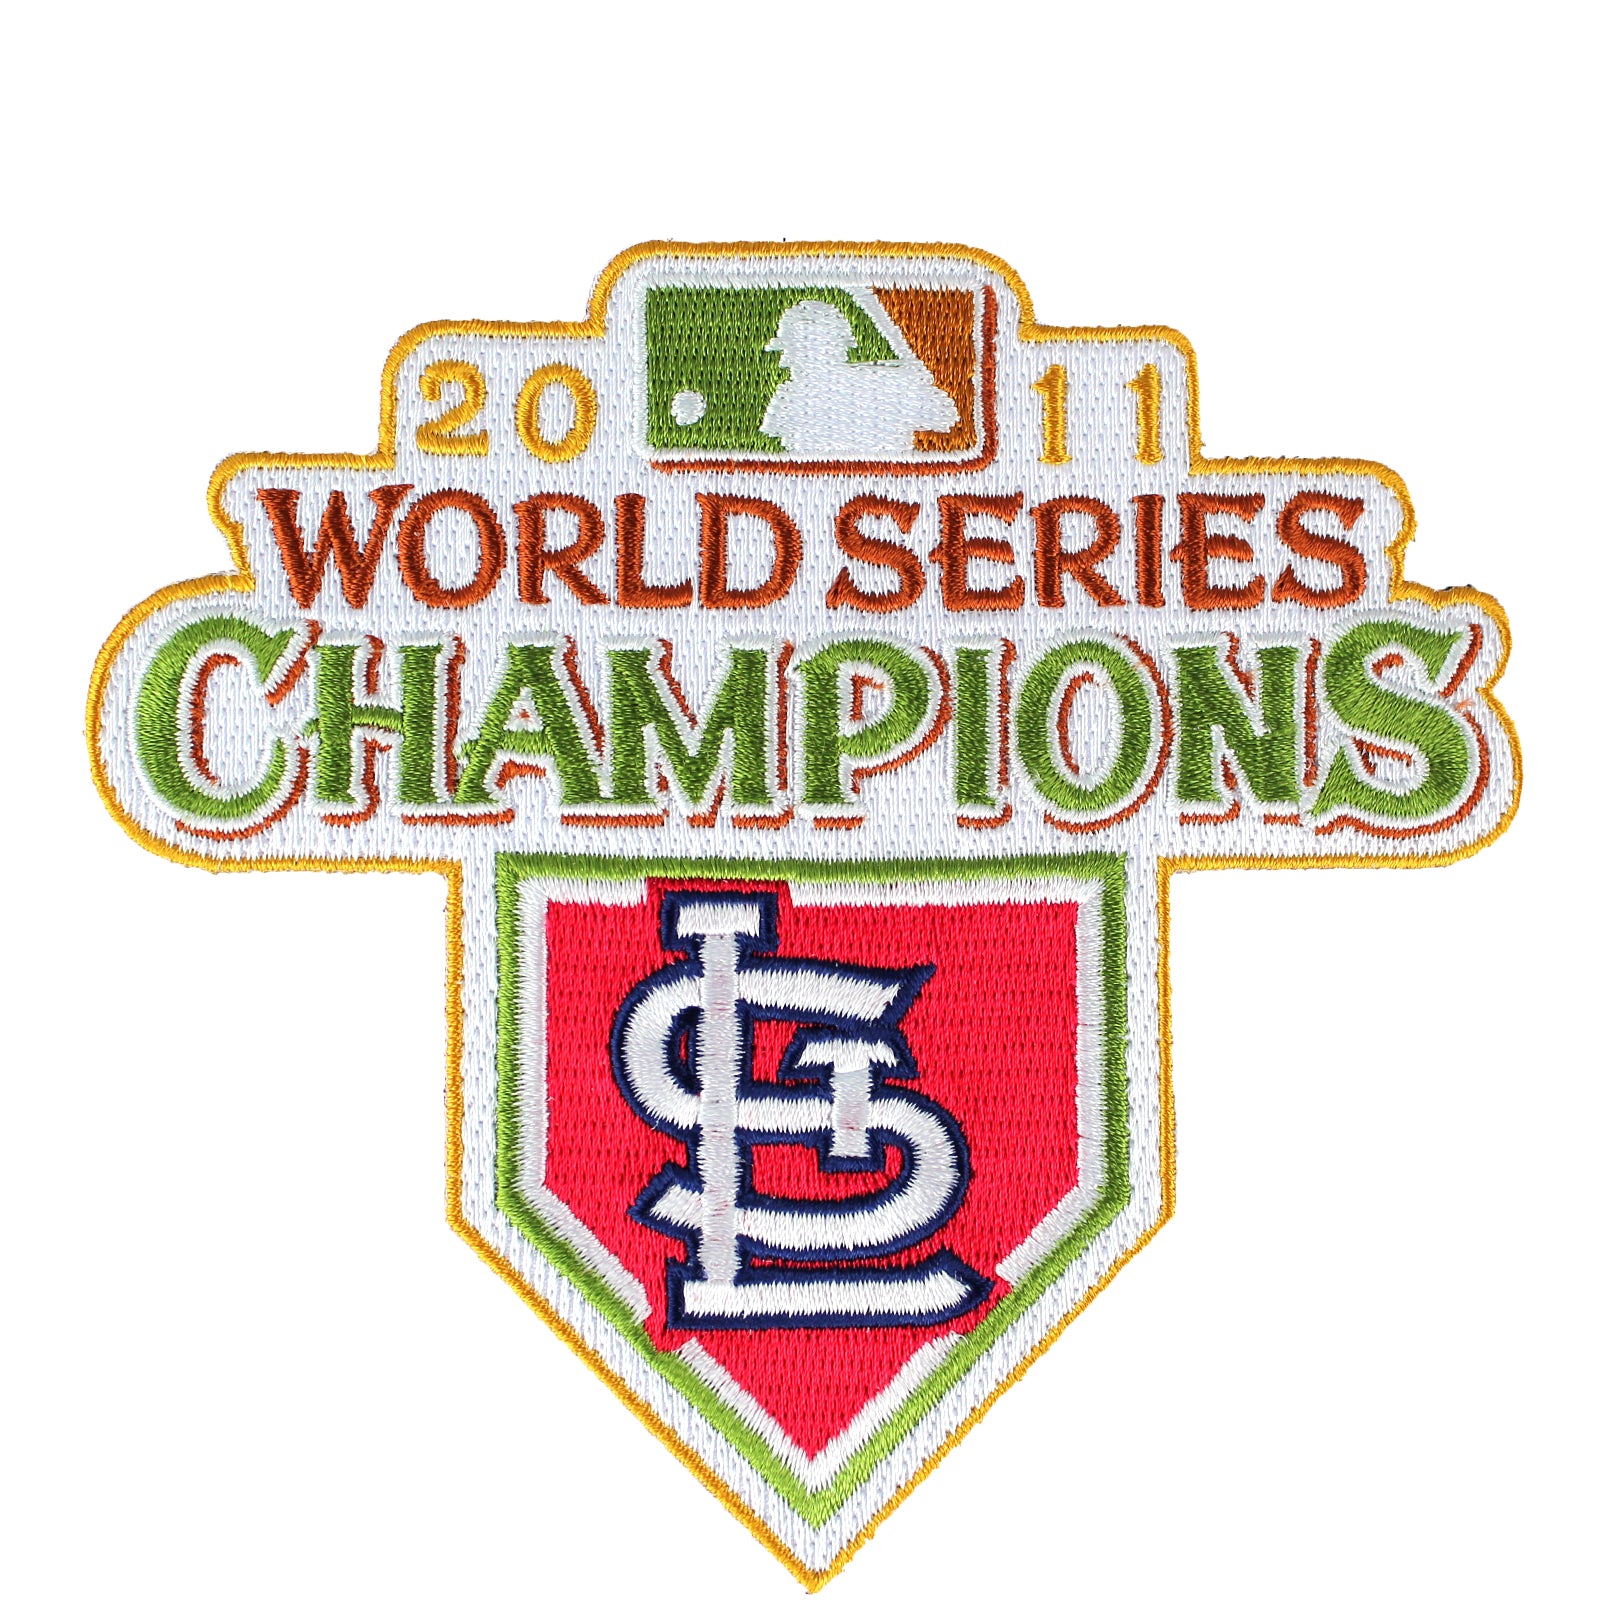 Cardinals to commemorate 10th anniversary of 2011 World Series